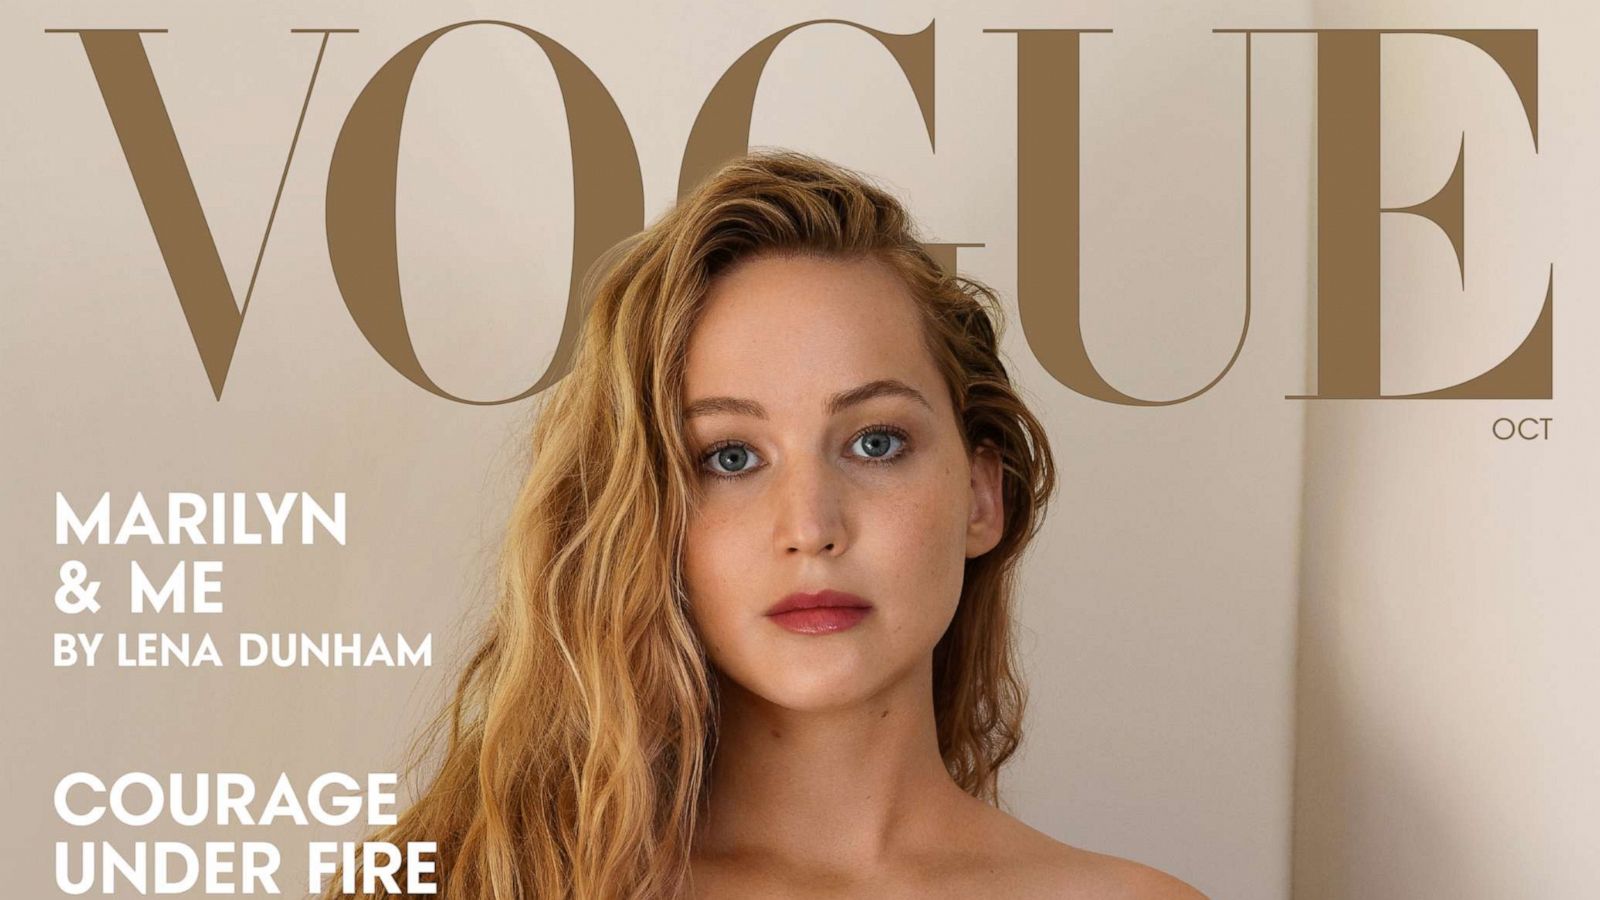 Jennifer Lawrence opens up to Vogue about being a new mom